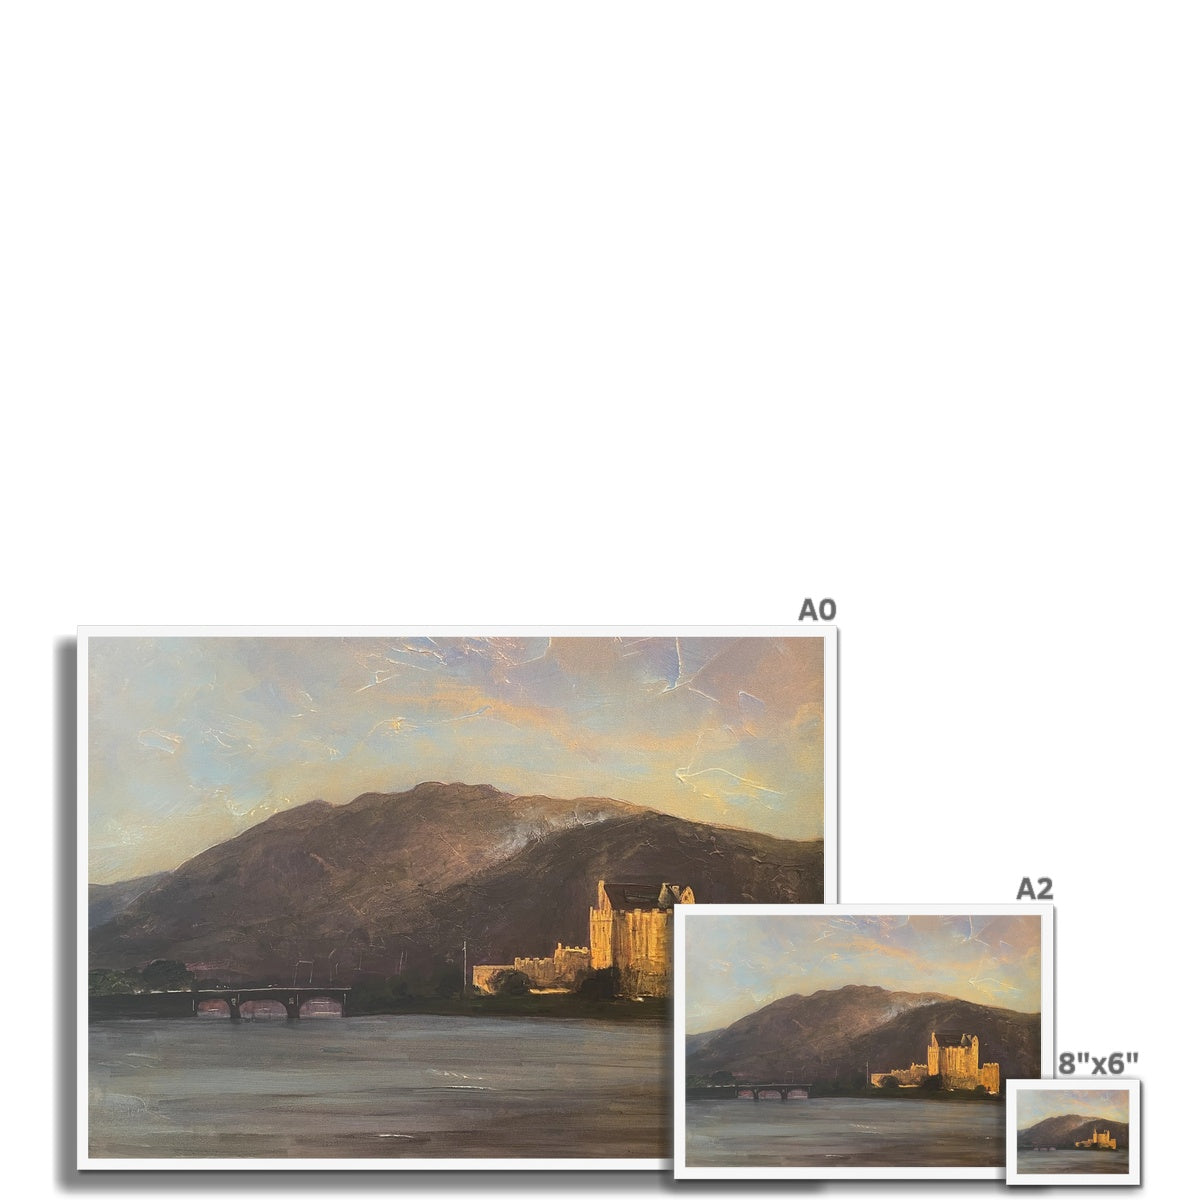 Eilean Donan Castle Painting | Framed Prints From Scotland-Framed Prints-Historic & Iconic Scotland Art Gallery-Paintings, Prints, Homeware, Art Gifts From Scotland By Scottish Artist Kevin Hunter